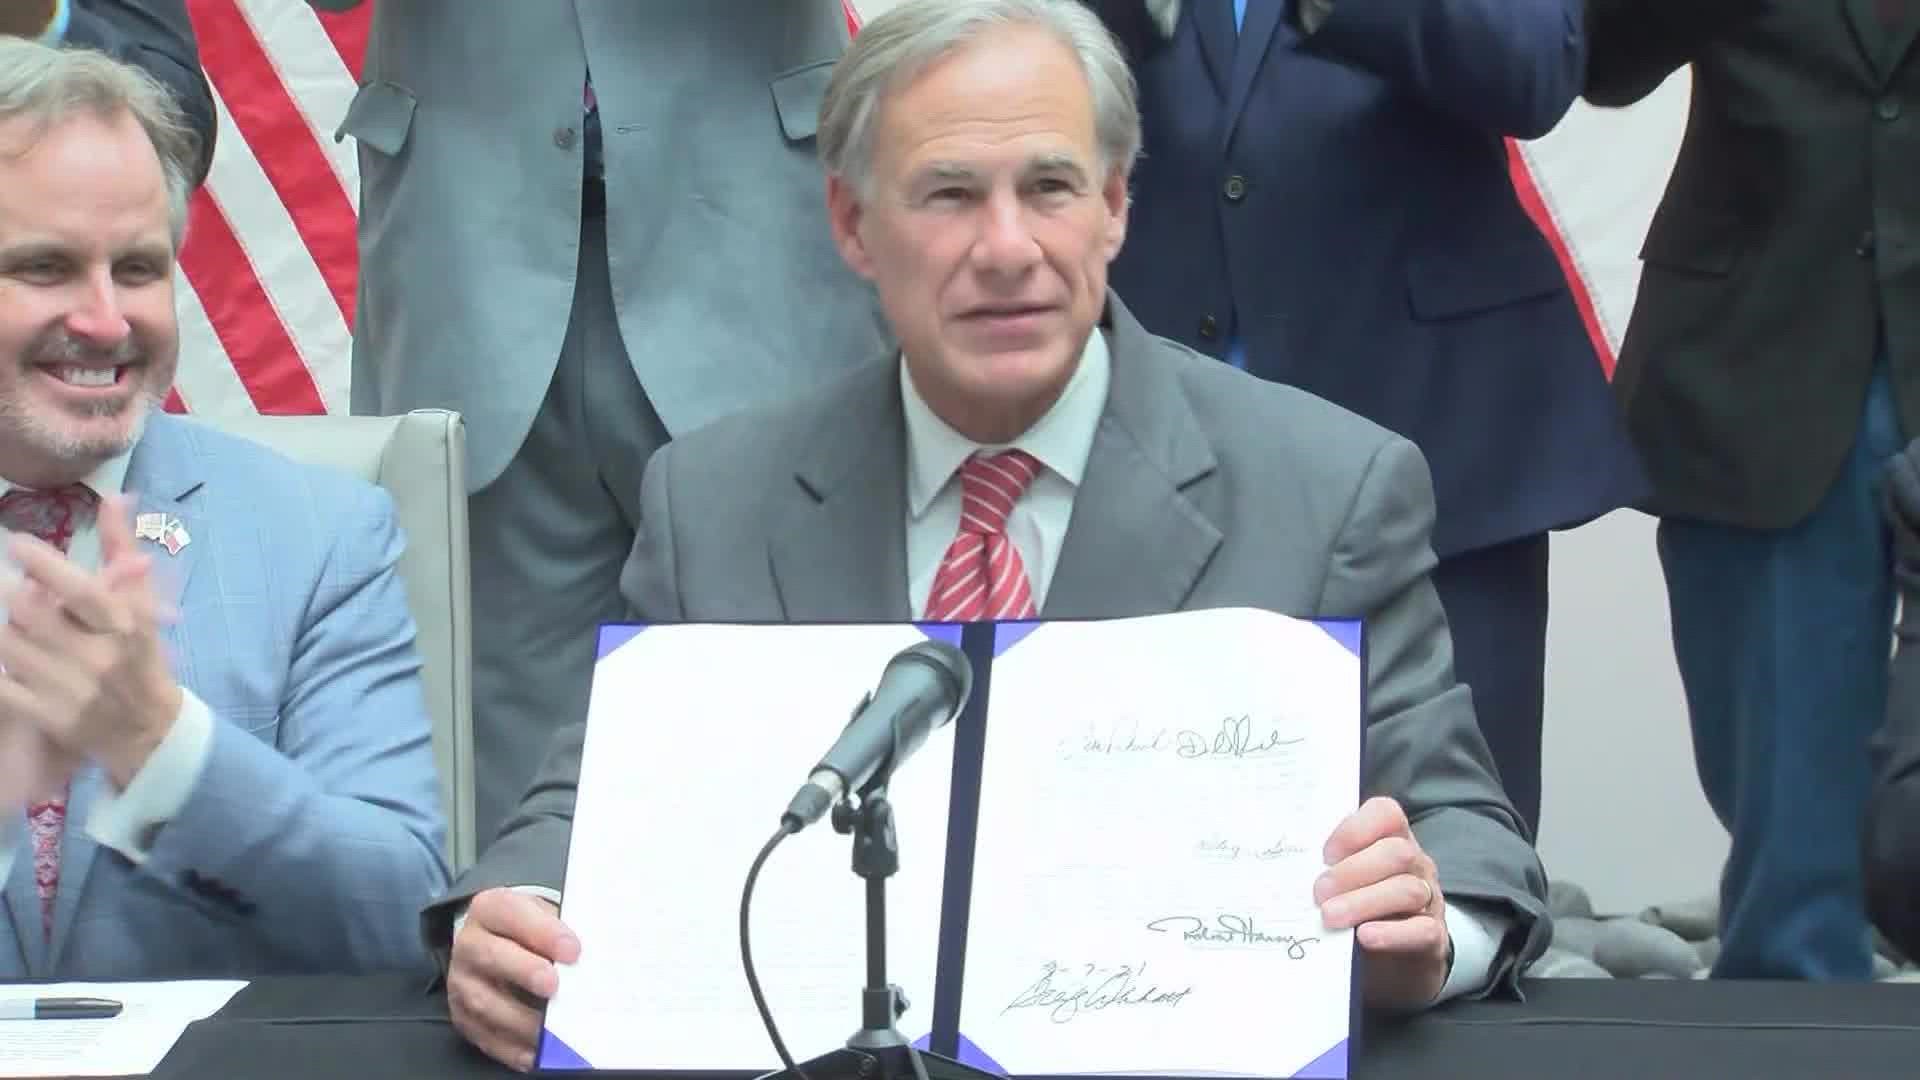 Gov. Abbott signs new GOP voting restrictions into law; lawsuits filed to block it.